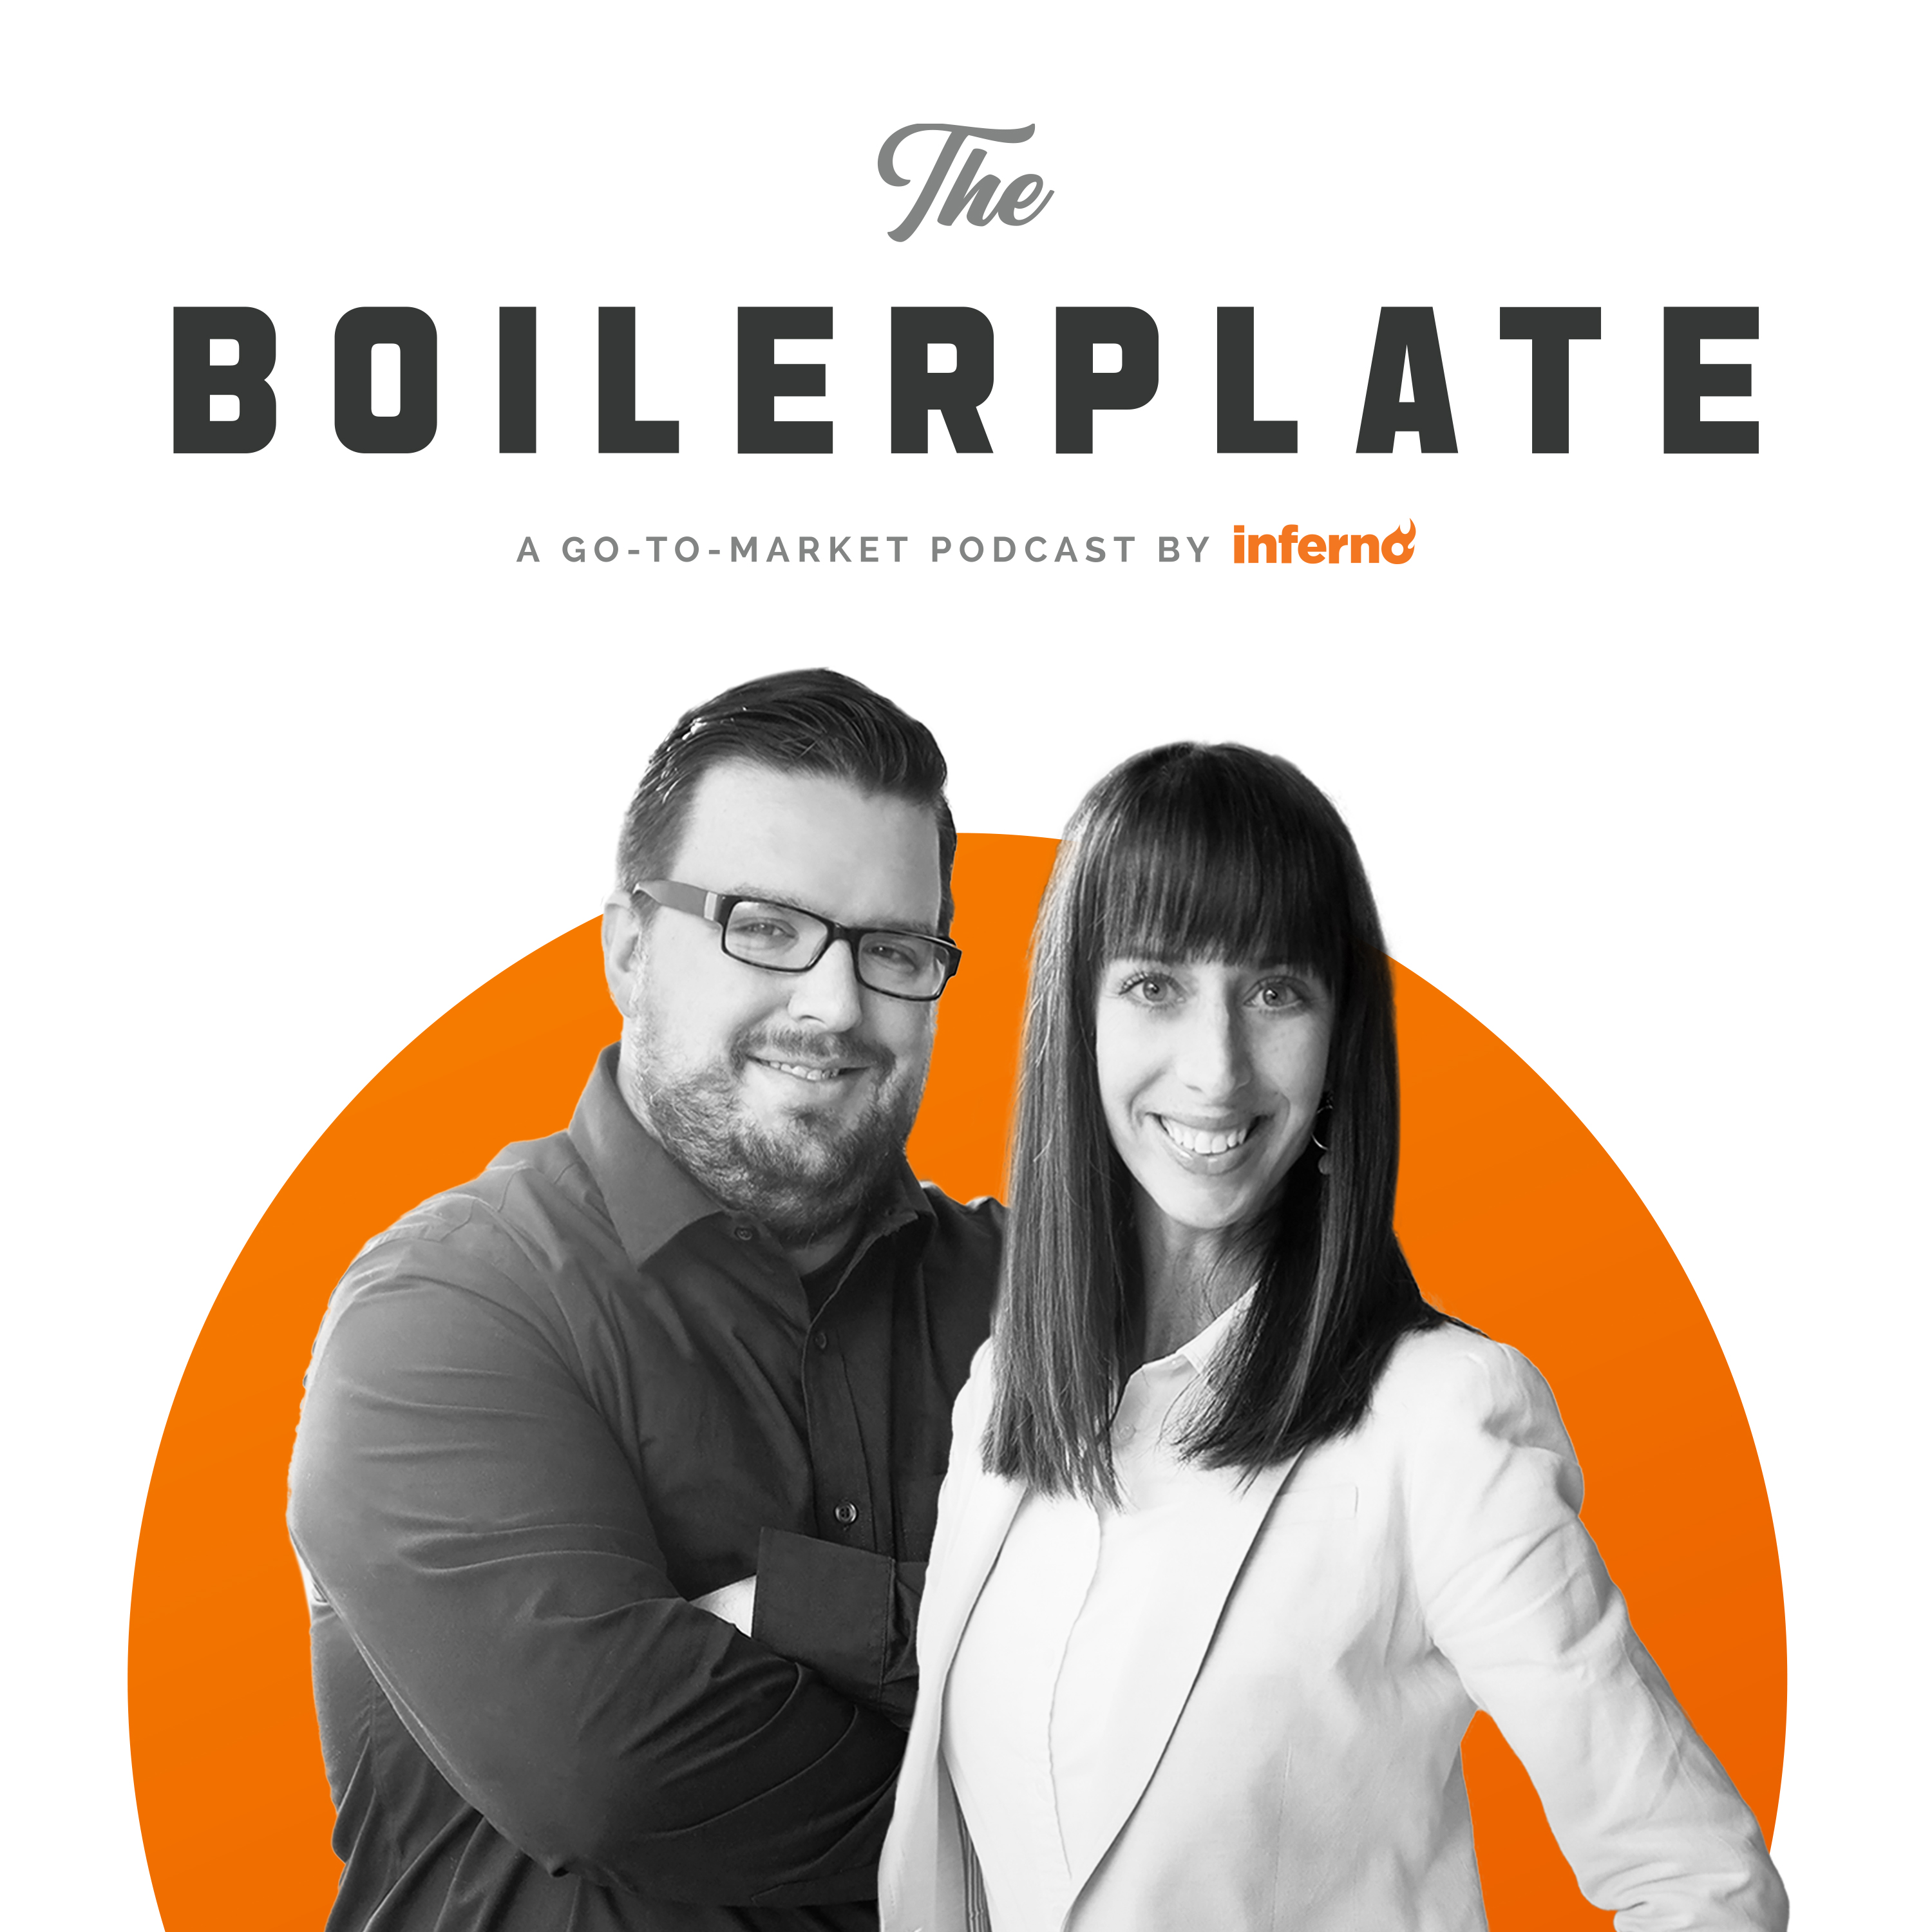 The Boilerplate Podcast